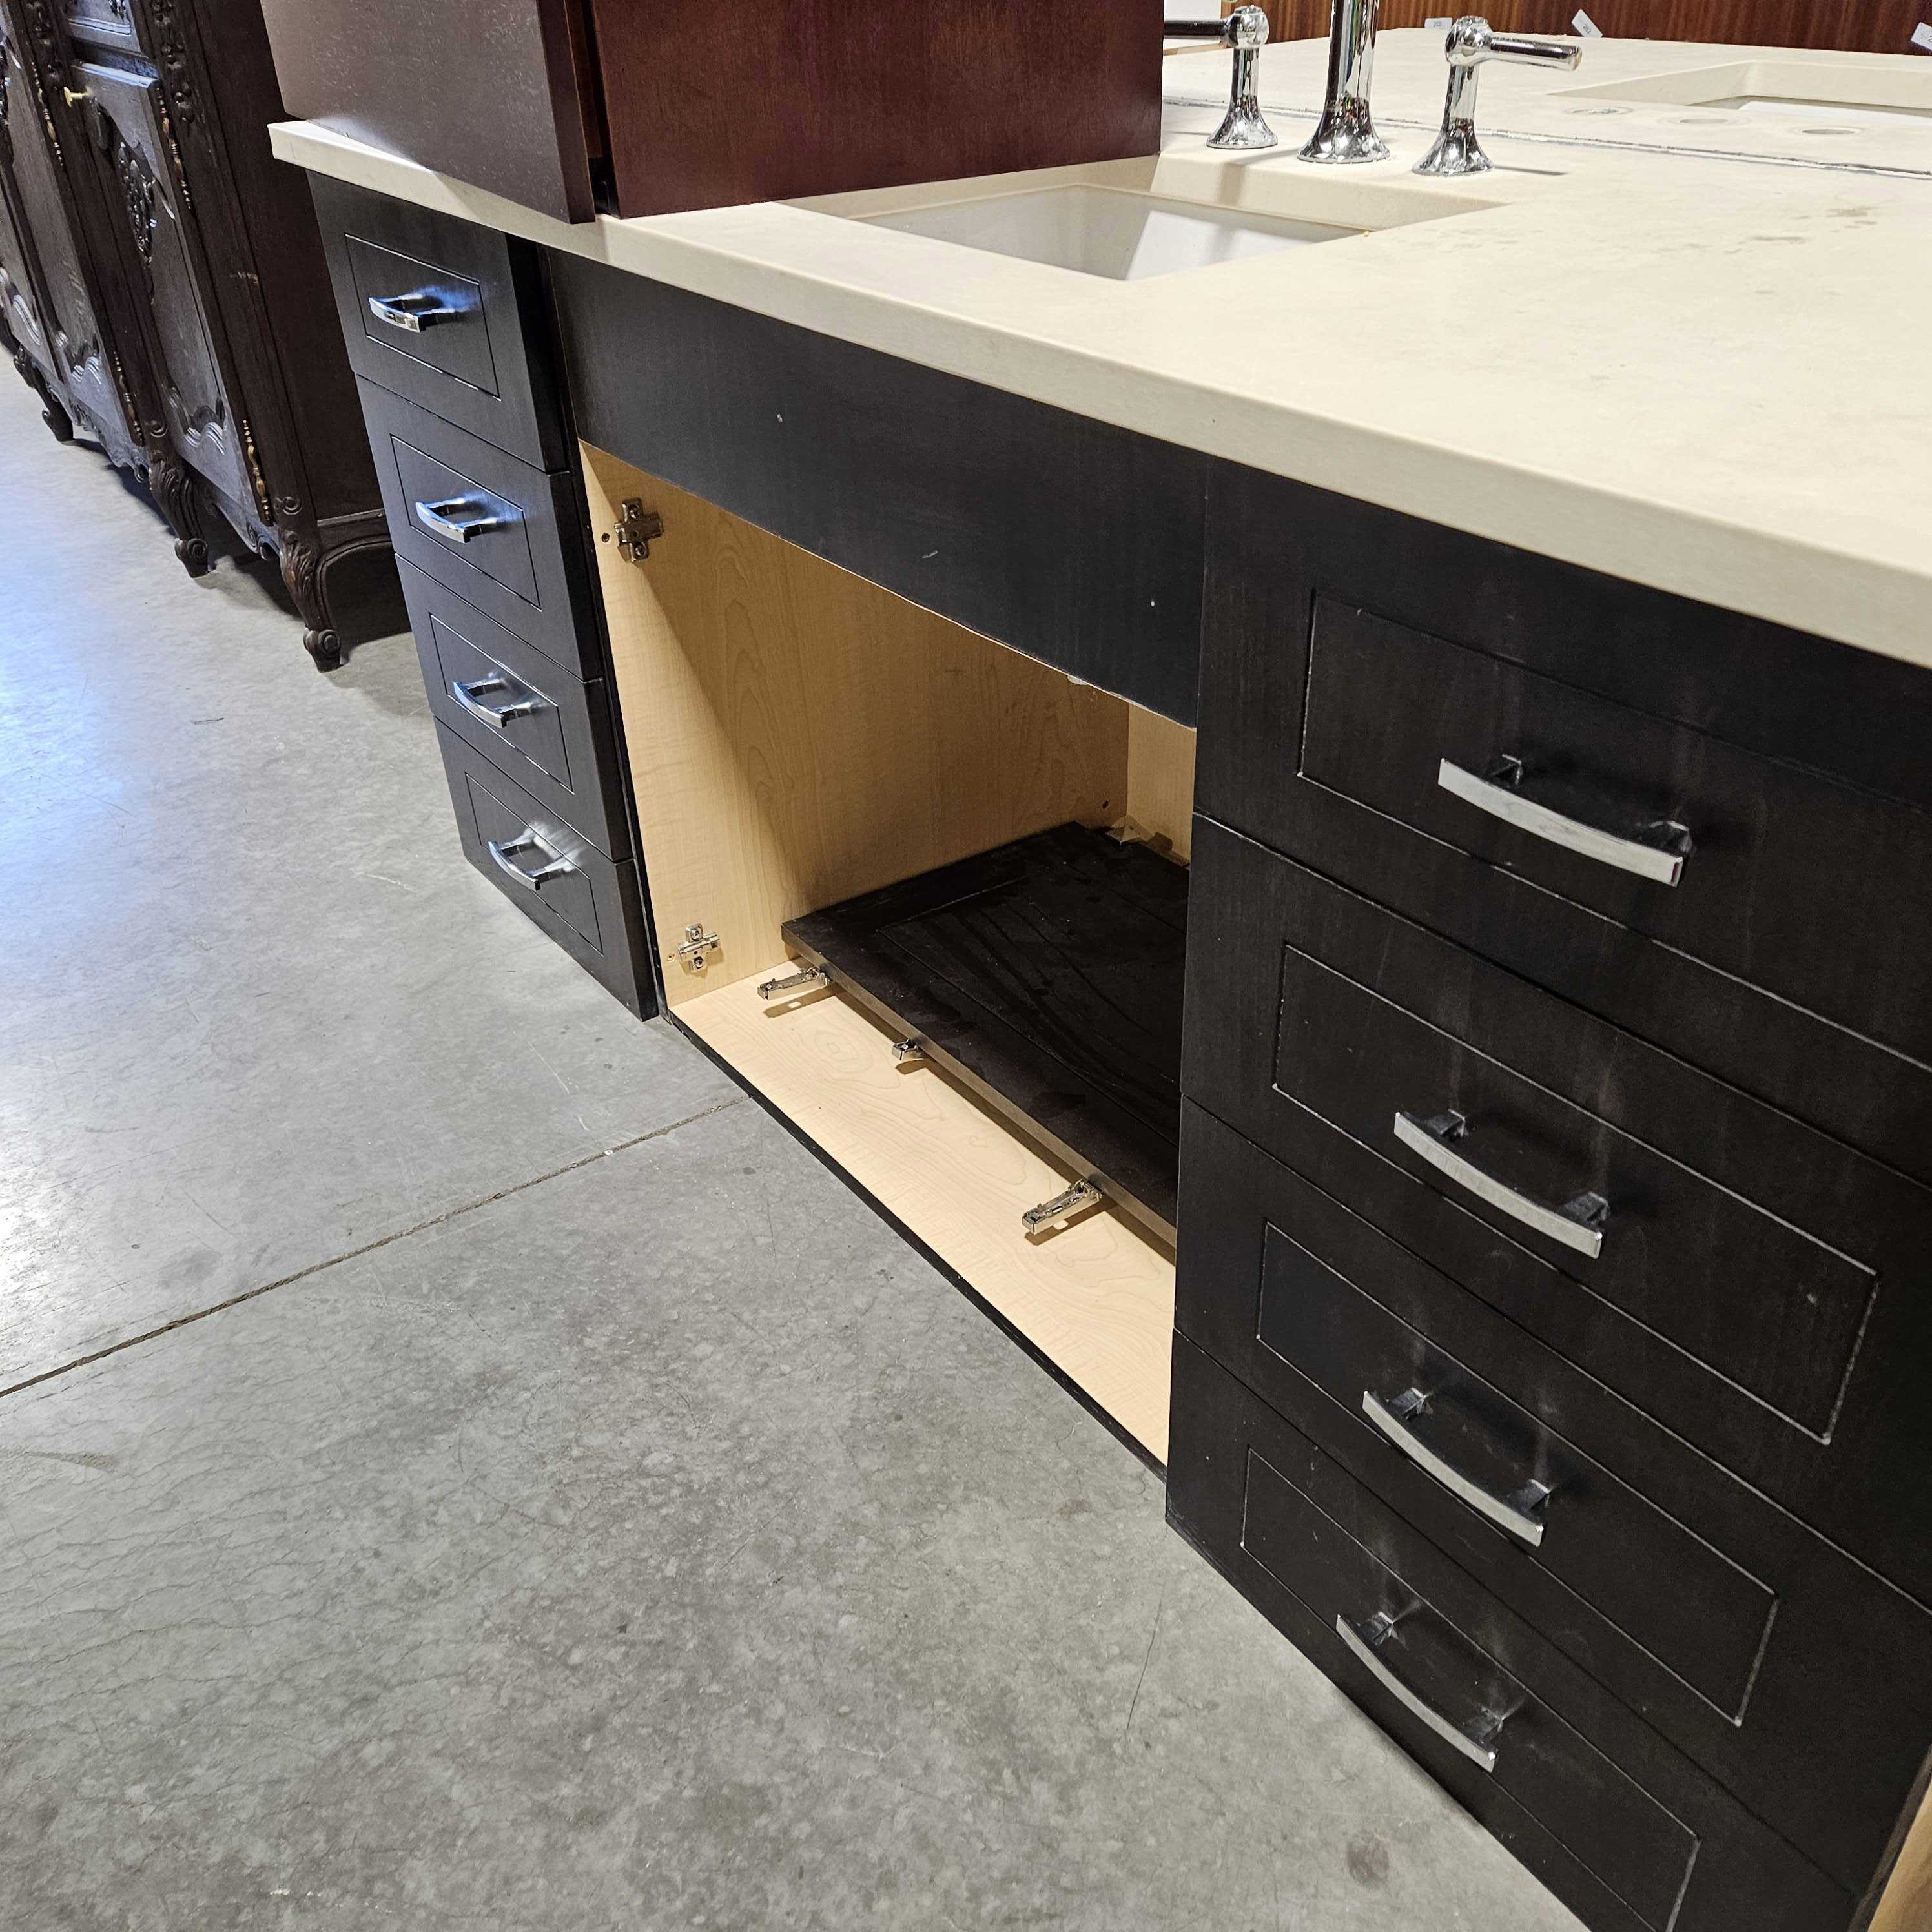 68"x 25"x 30" Black Stained Chrome Hardware 8 Drawer Travertine Look Cultured Stone Top Undermount Sink faucet Vanity